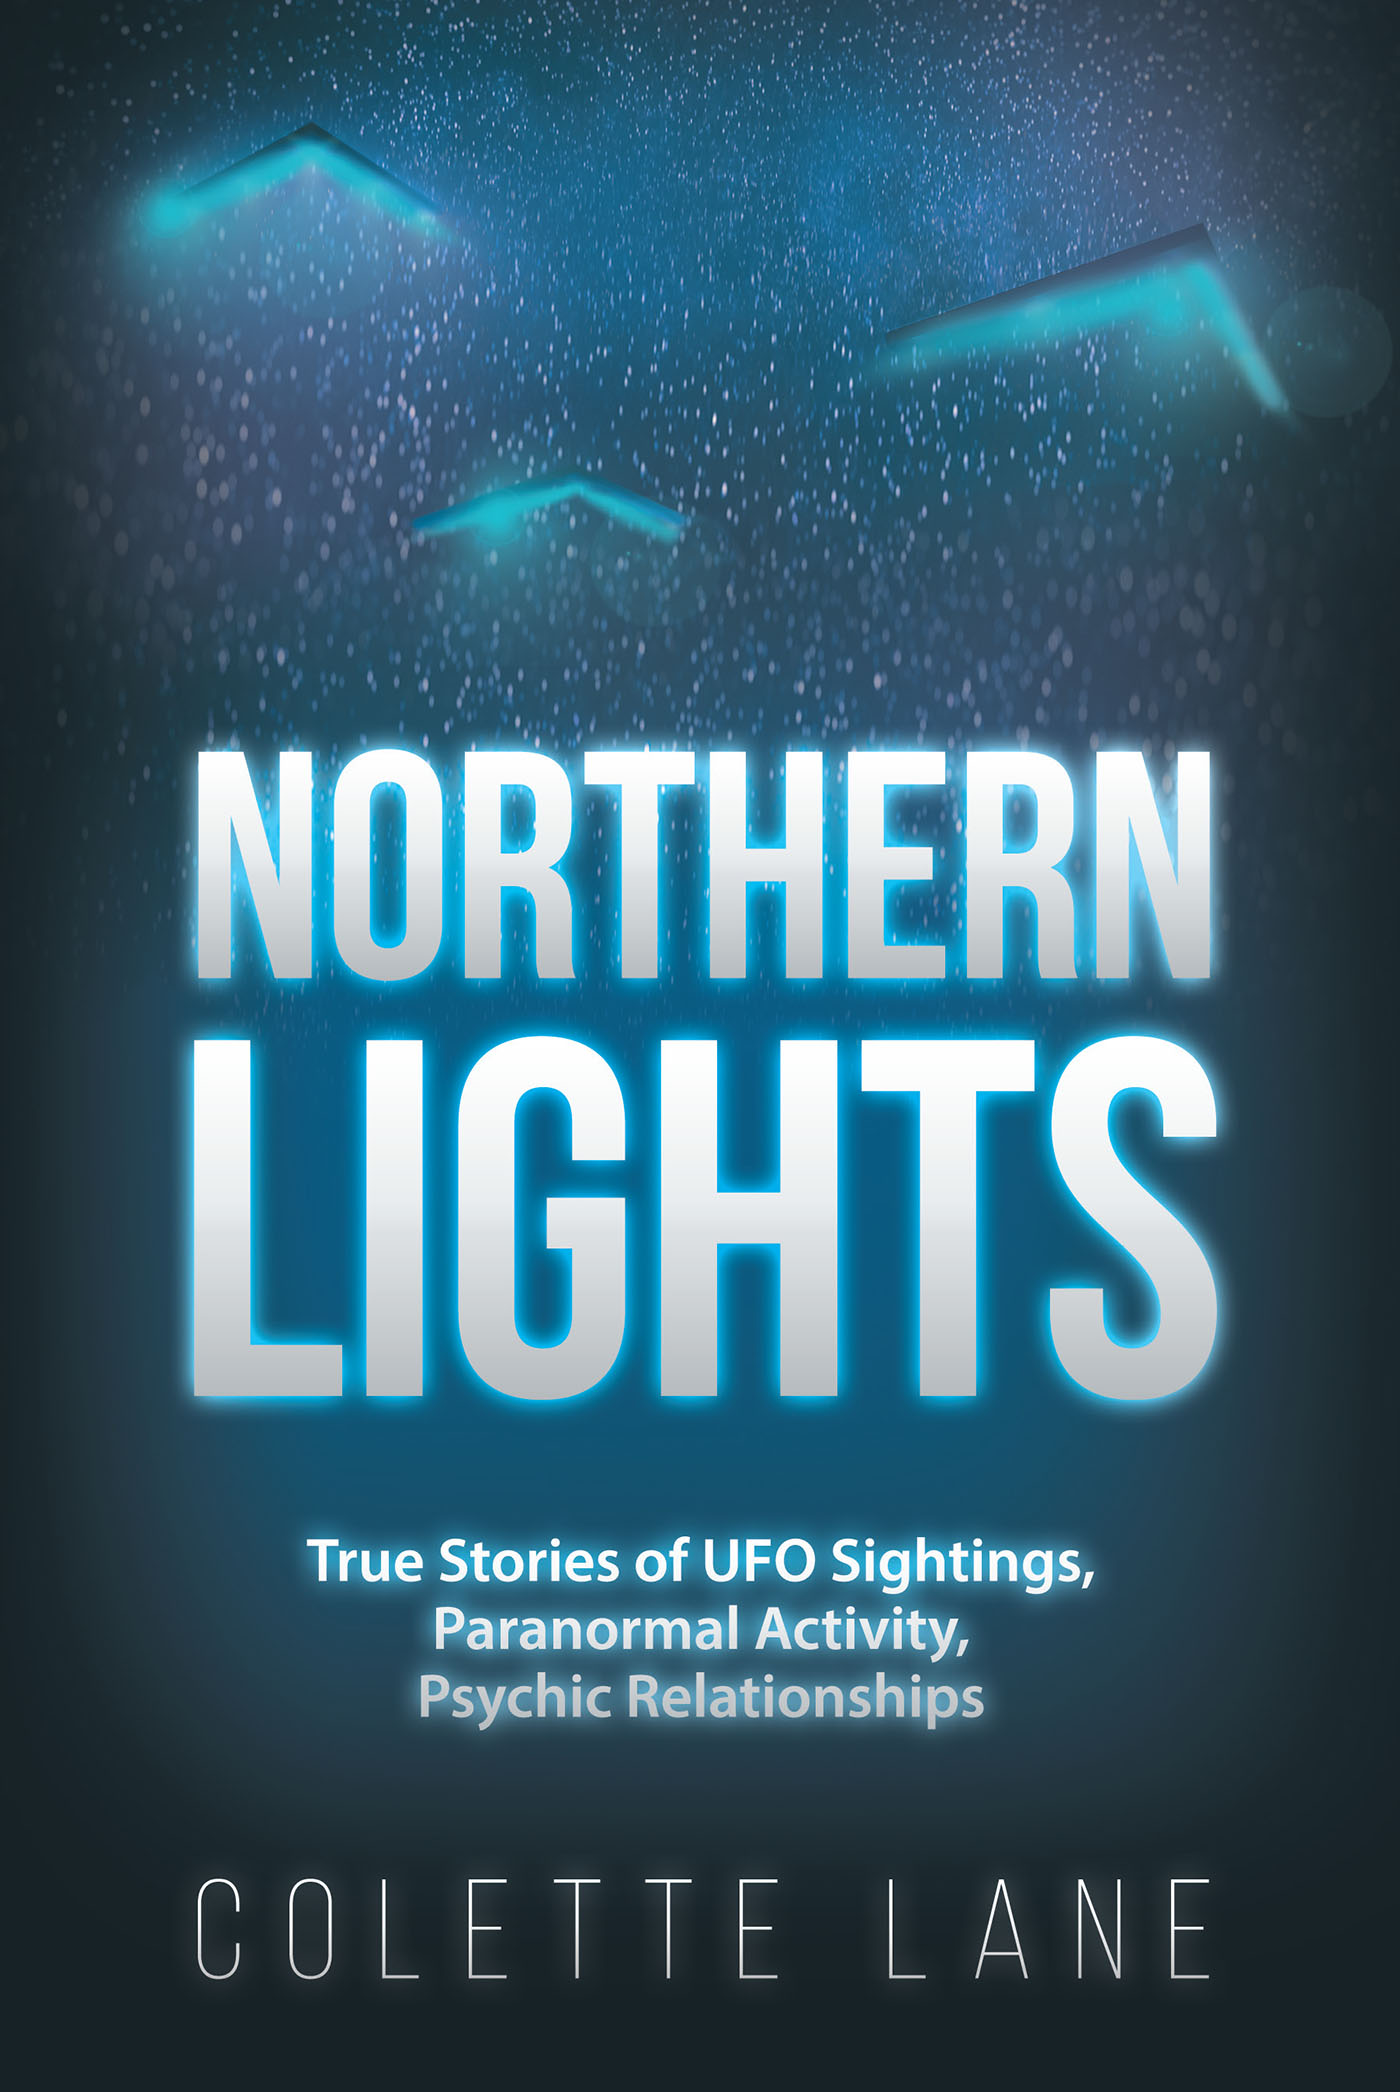 Colette Lane’s New Book, “Northern Lights: True Stories of UFO Sightings, Paranormal Activity, Psychic Relationships,” is a Mystical Work Based on True Events